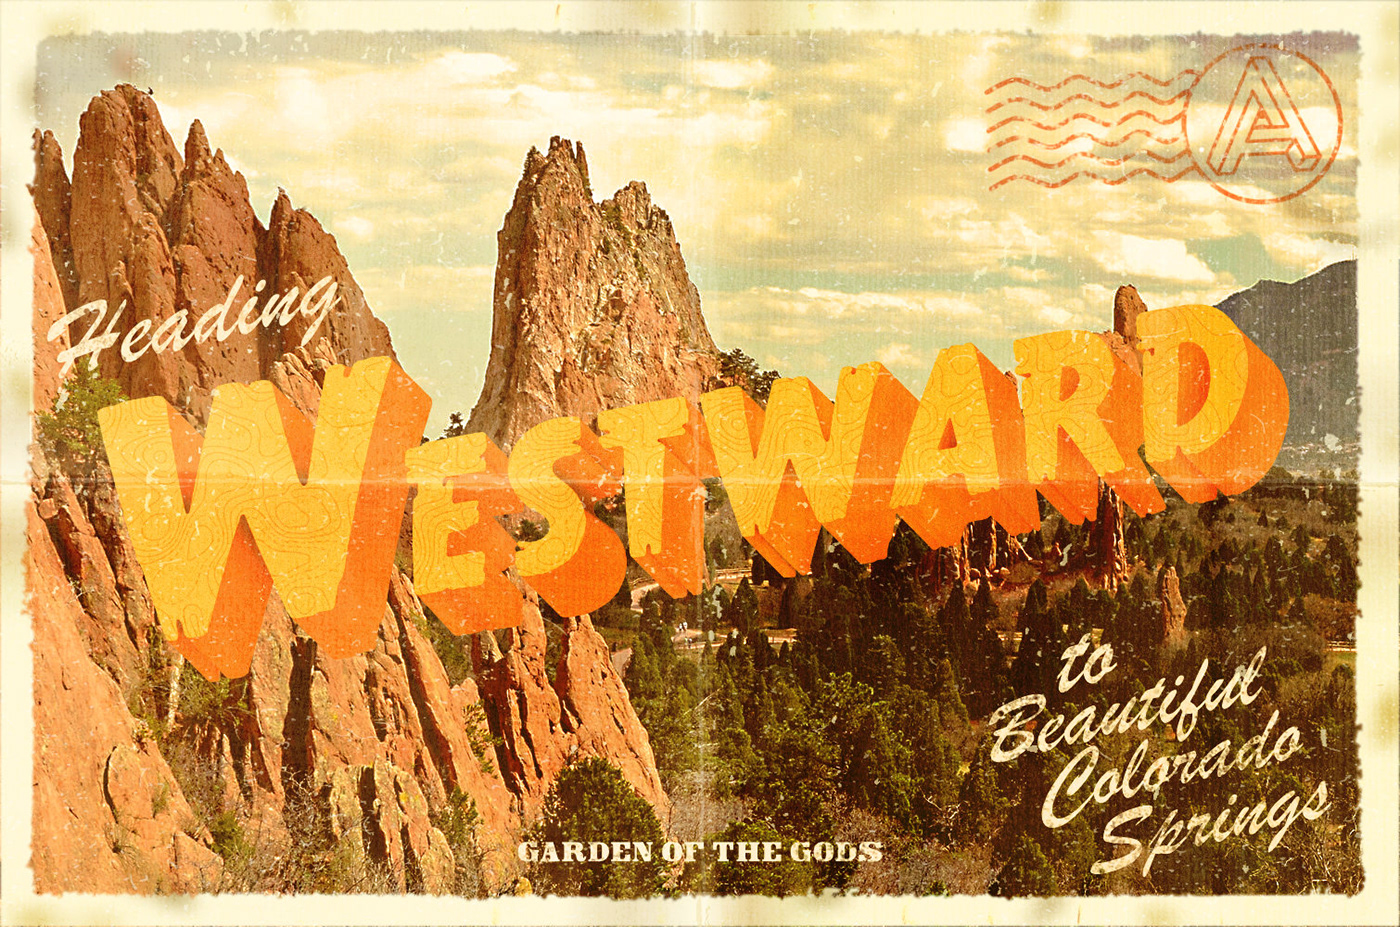 adventure Colorado colorado springs Garden of the Gods lettering mail map Nature outdoors postcard Travel west westward